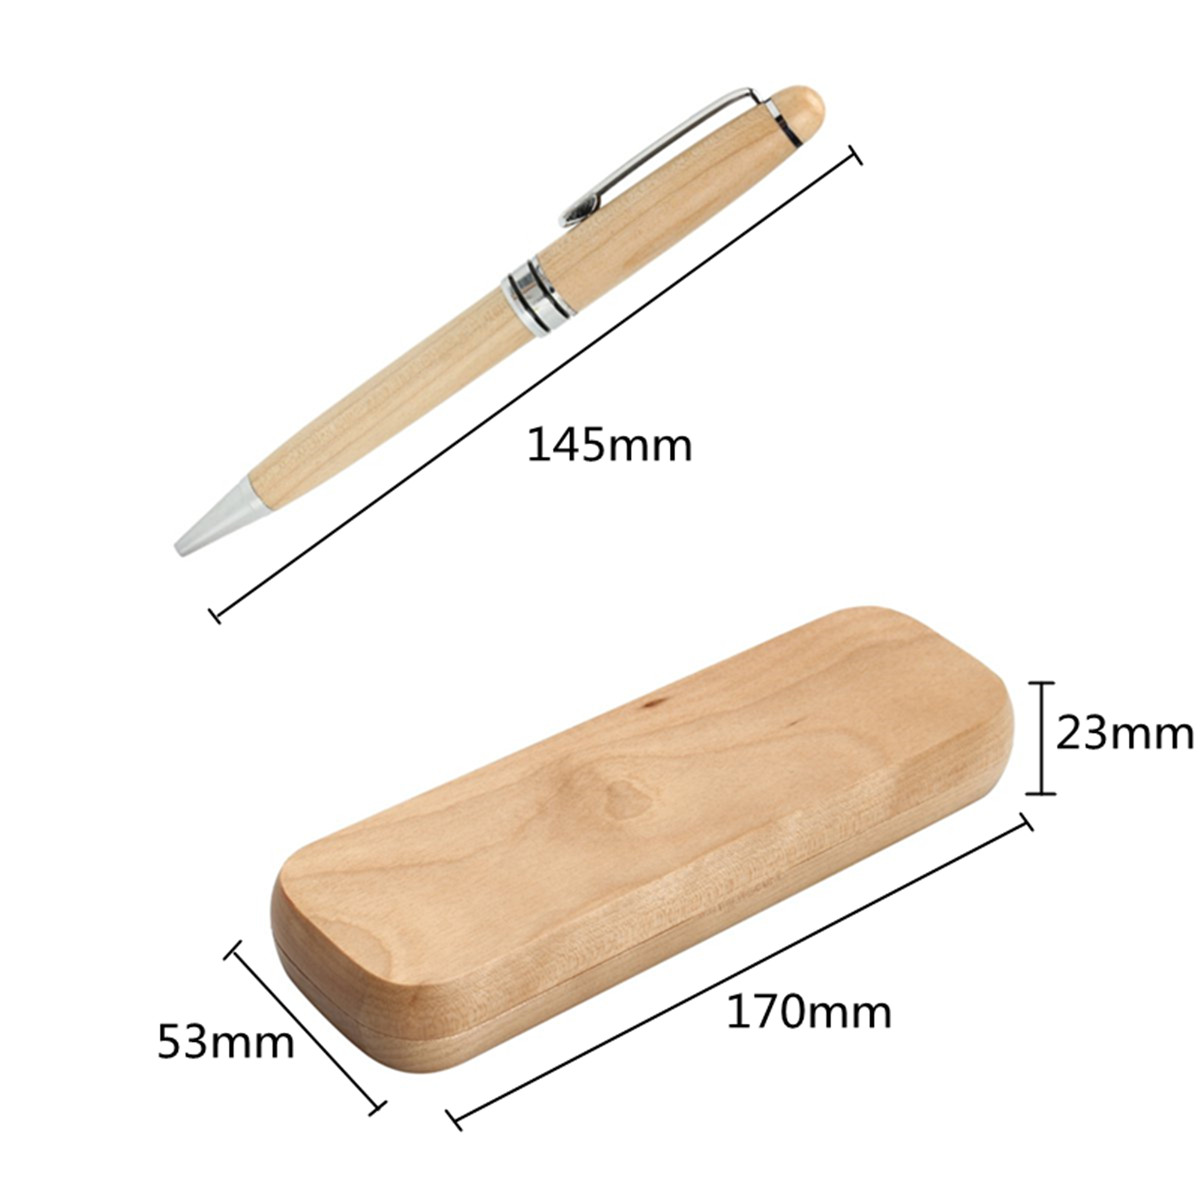 07mm-Wooden-Engraved-Ballpoint-Pen-WIth-Gift-Box-For-Kids-Students-Children-School-Writing-Gift-1312248-3